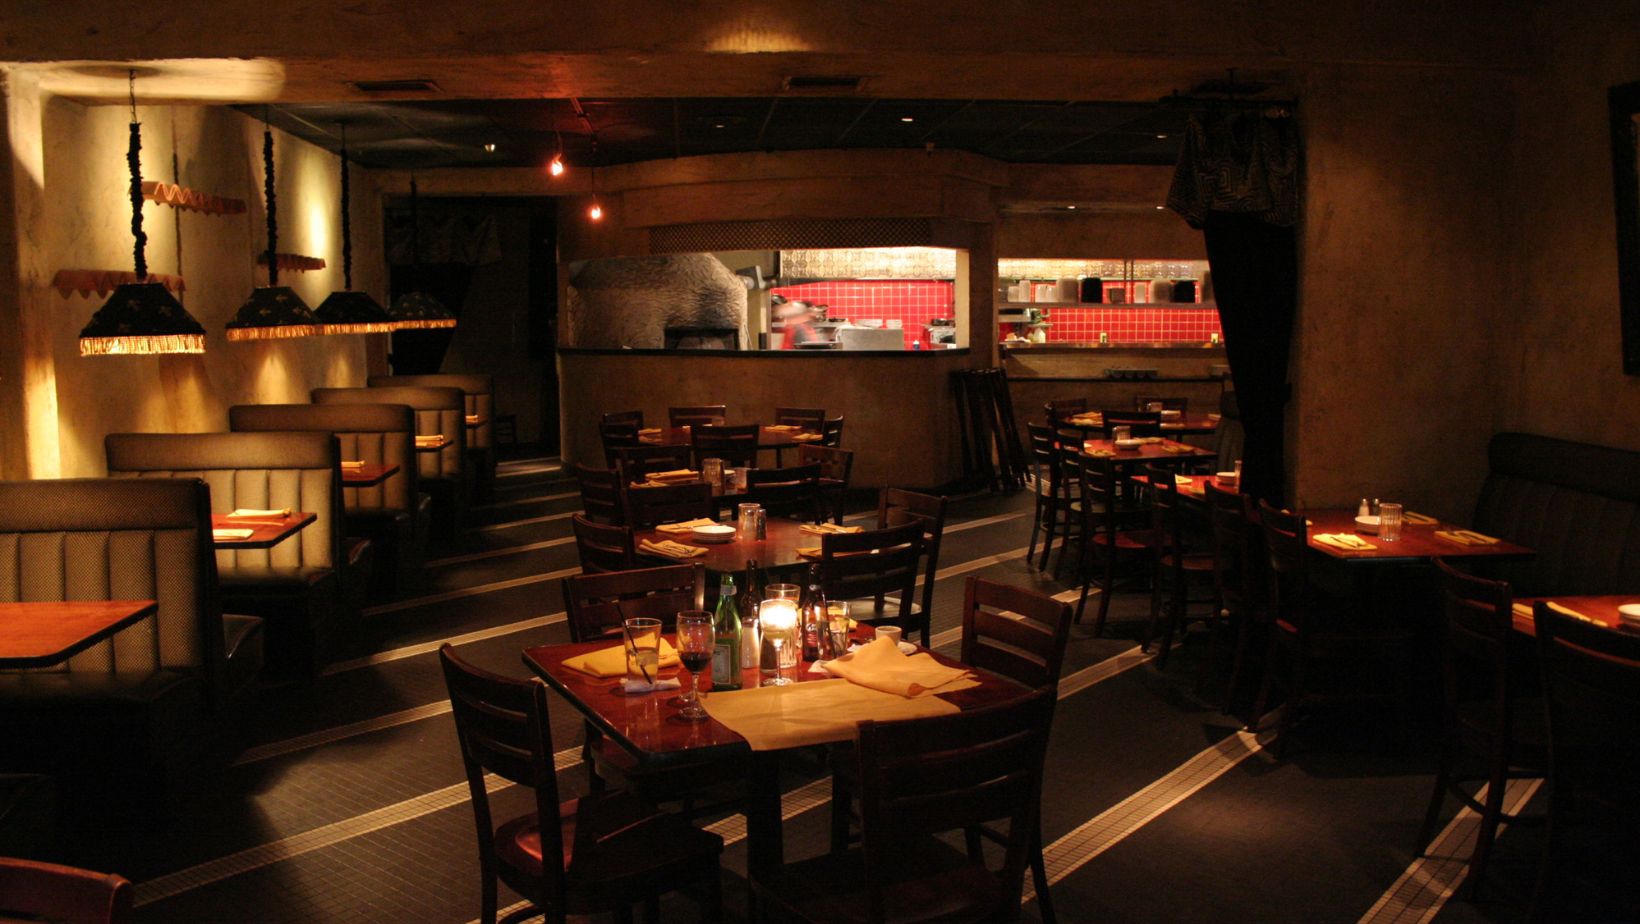 Interior of a restaurant showing the variety of restuarant location and concept.